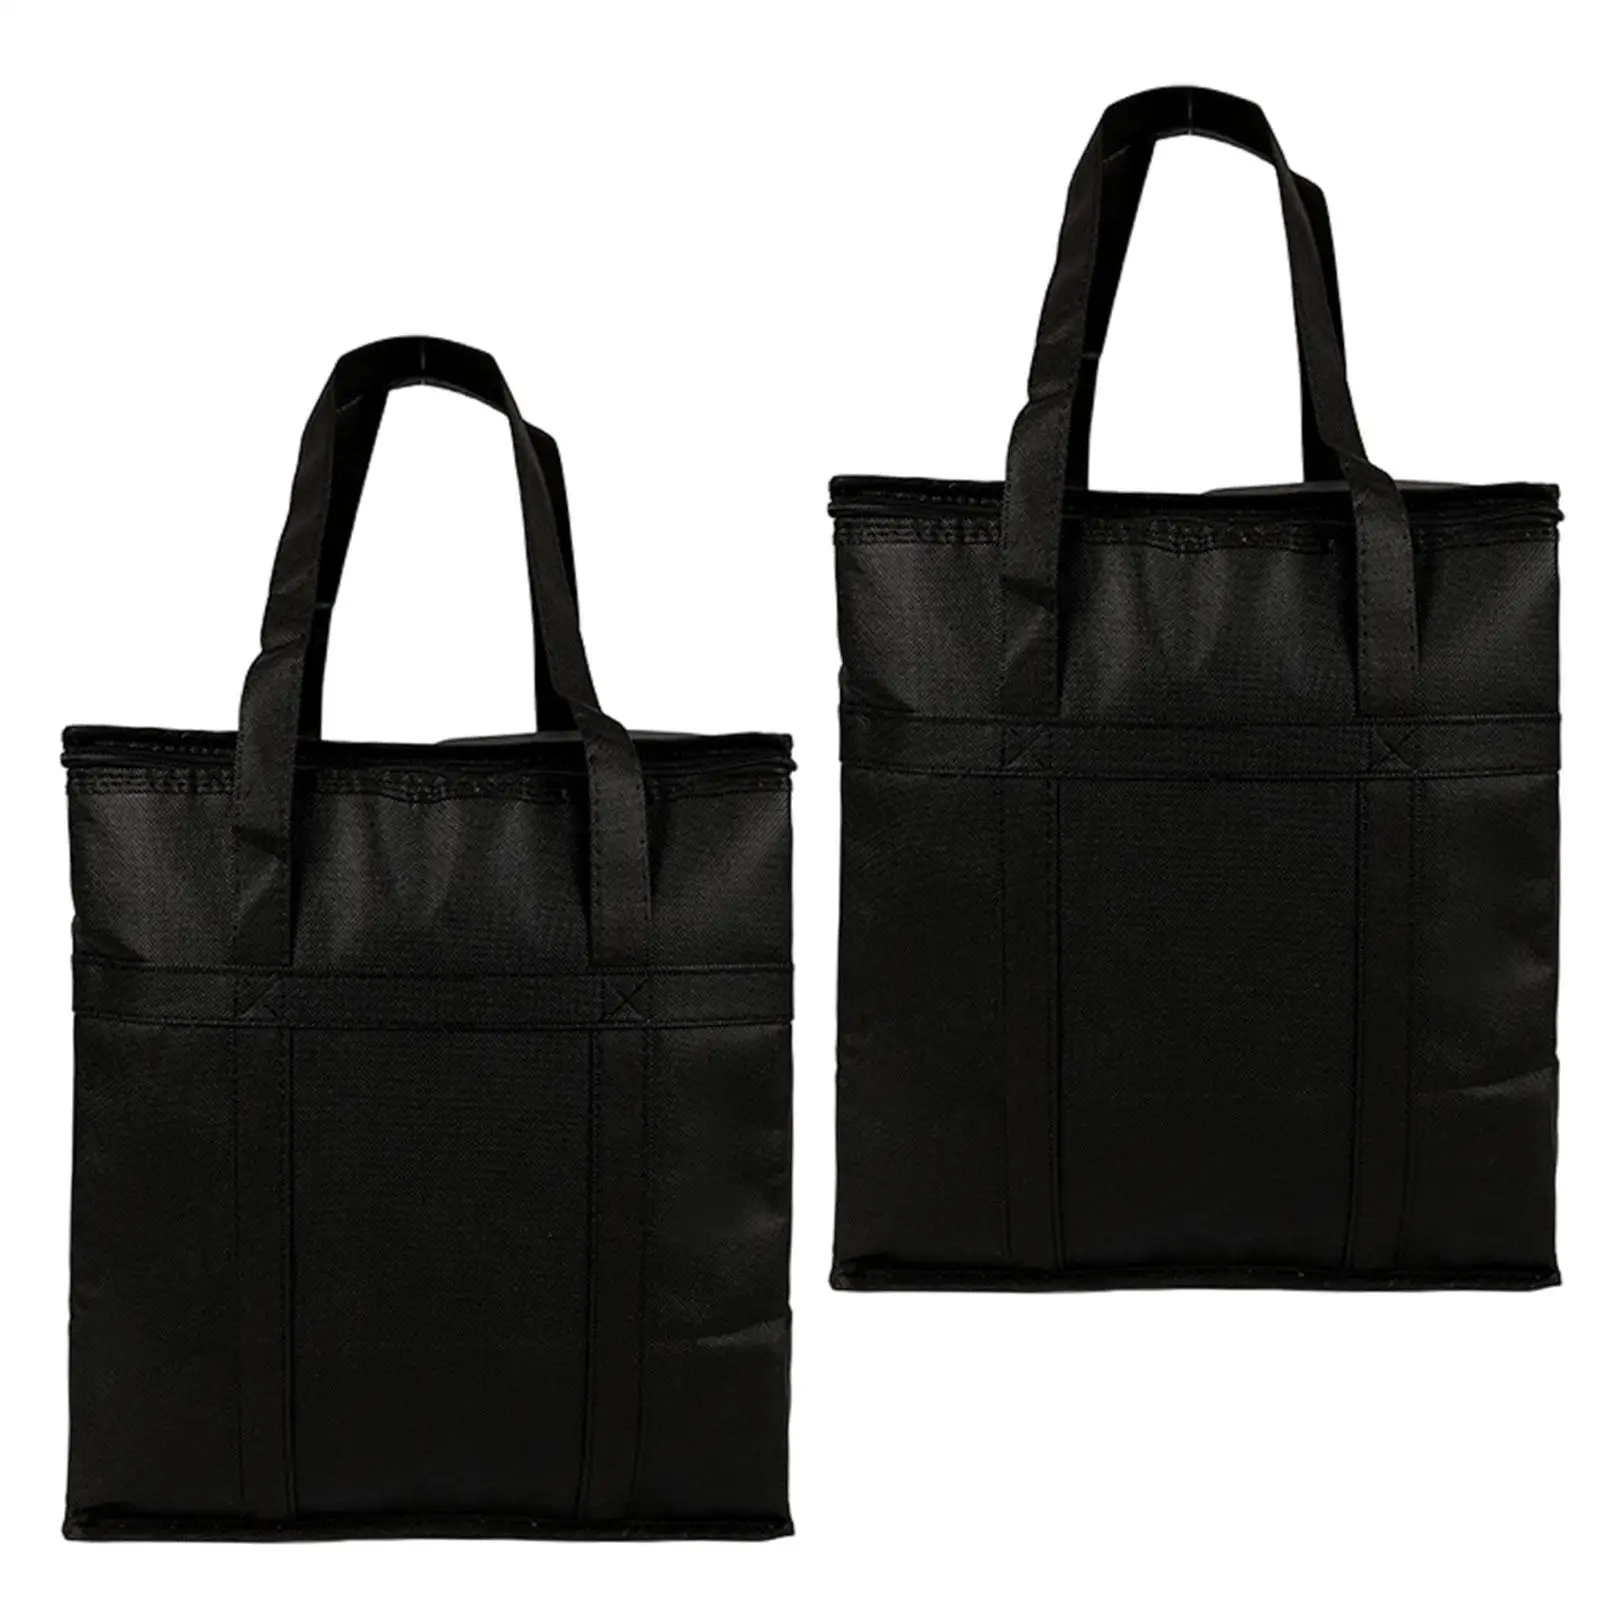 Insulated Take Away Bags with Zippered Top Cooling Bag Shopping Bag Reusable Bags for Outdoor Restaurant Camping Coffee